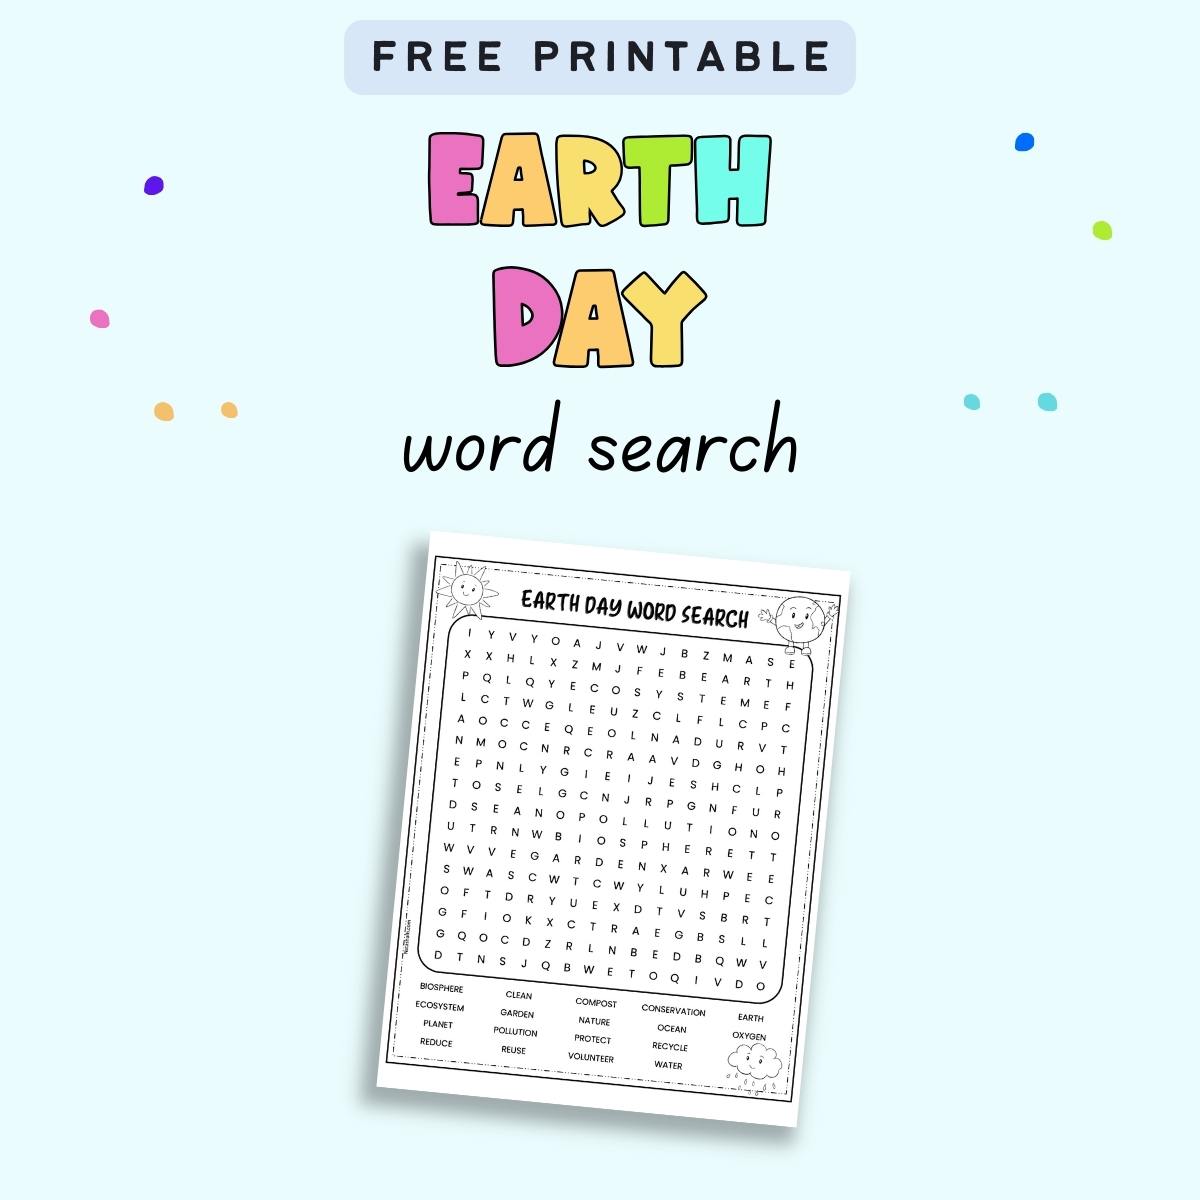 Text "free printable earth day word search" with a  preview of a word search puzzle